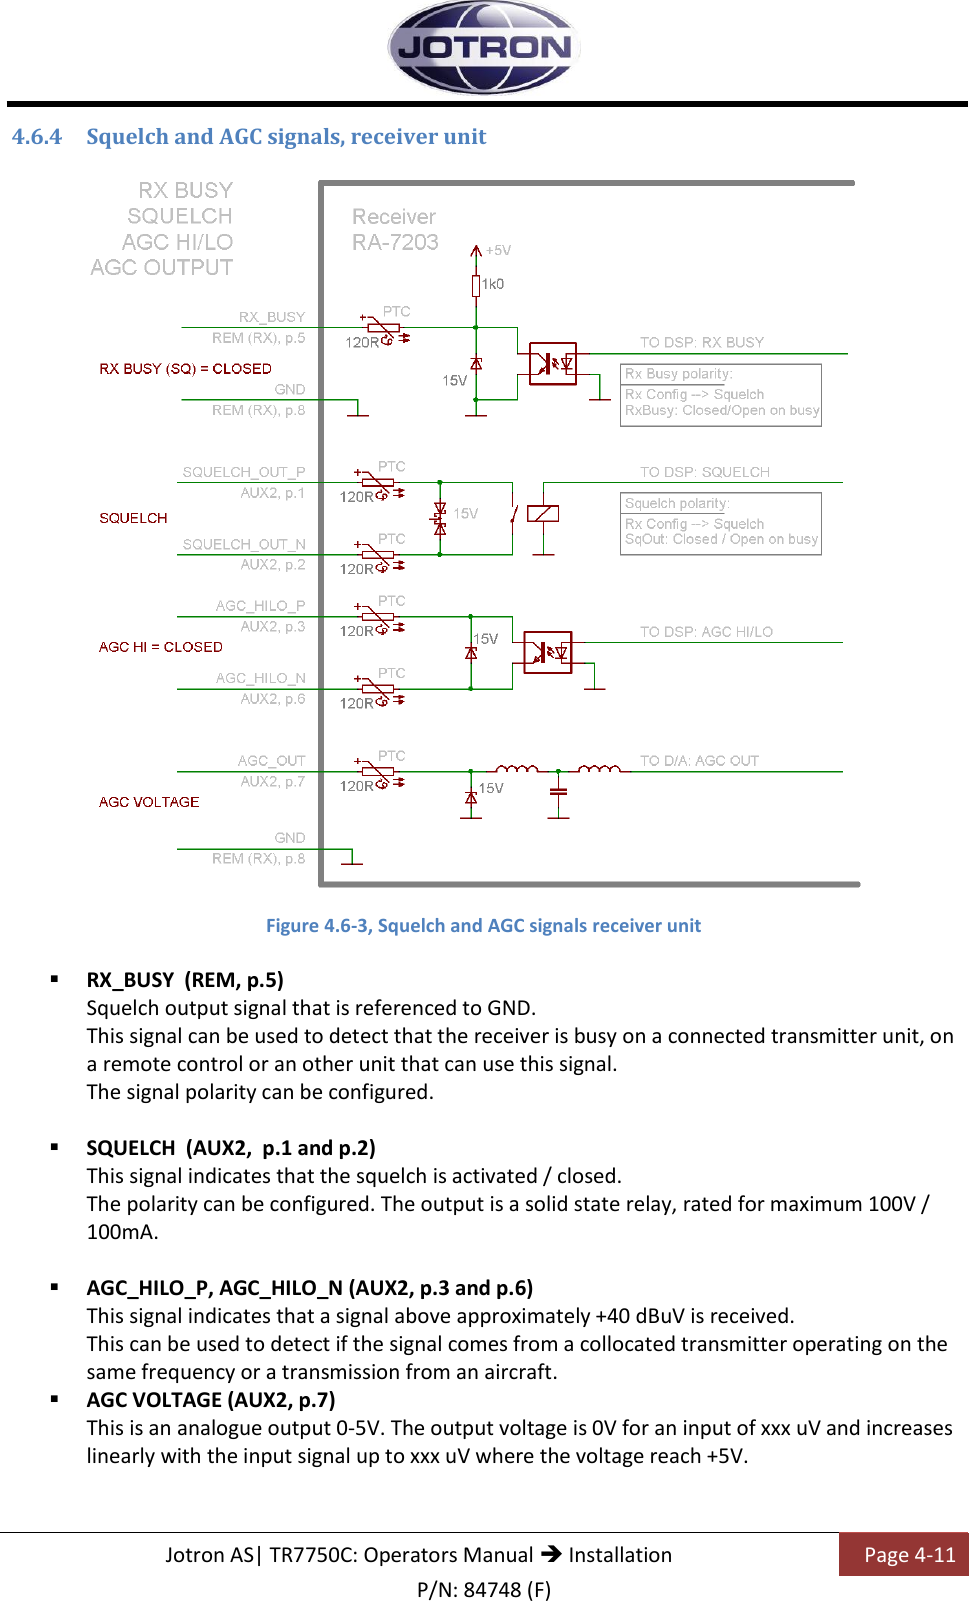   Jotron AS| TR7750C: Operators Manual  Installation Page 4-11 P/N: 84748 (F) 4.6.4 Squelch and AGC signals, receiver unit    Figure 4.6-3, Squelch and AGC signals receiver unit   RX_BUSY  (REM, p.5) Squelch output signal that is referenced to GND. This signal can be used to detect that the receiver is busy on a connected transmitter unit, on a remote control or an other unit that can use this signal. The signal polarity can be configured.   SQUELCH  (AUX2,  p.1 and p.2) This signal indicates that the squelch is activated / closed. The polarity can be configured. The output is a solid state relay, rated for maximum 100V / 100mA.   AGC_HILO_P, AGC_HILO_N (AUX2, p.3 and p.6) This signal indicates that a signal above approximately +40 dBuV is received. This can be used to detect if the signal comes from a collocated transmitter operating on the same frequency or a transmission from an aircraft.  AGC VOLTAGE (AUX2, p.7) This is an analogue output 0-5V. The output voltage is 0V for an input of xxx uV and increases linearly with the input signal up to xxx uV where the voltage reach +5V.  